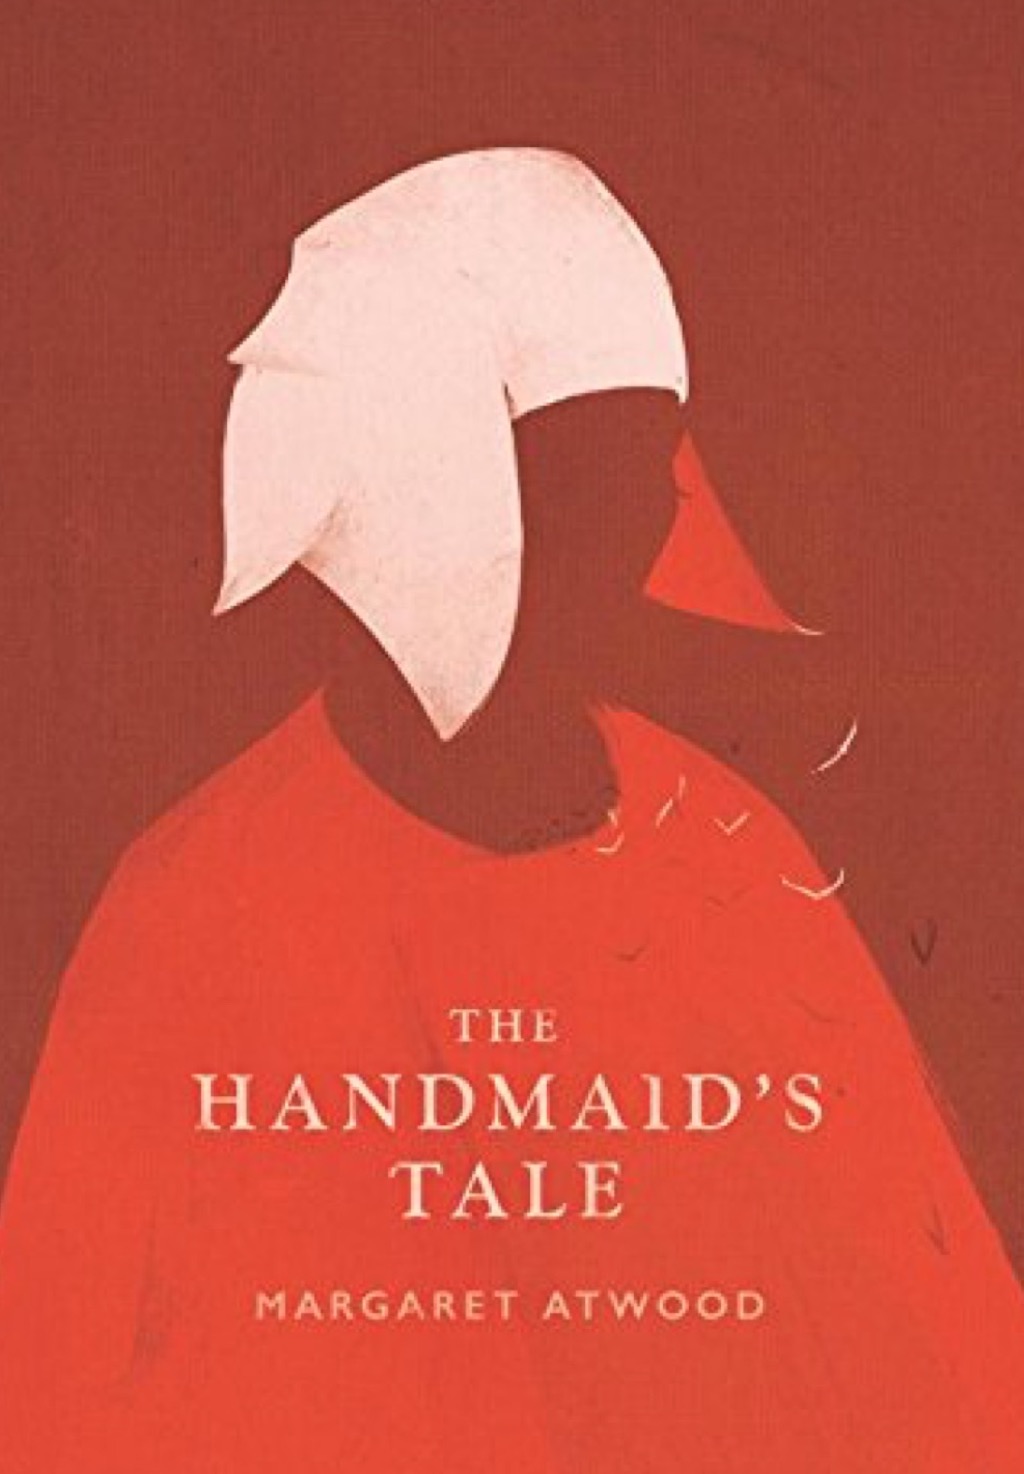 The Handmaid's Tale books every woman should read in her 40s